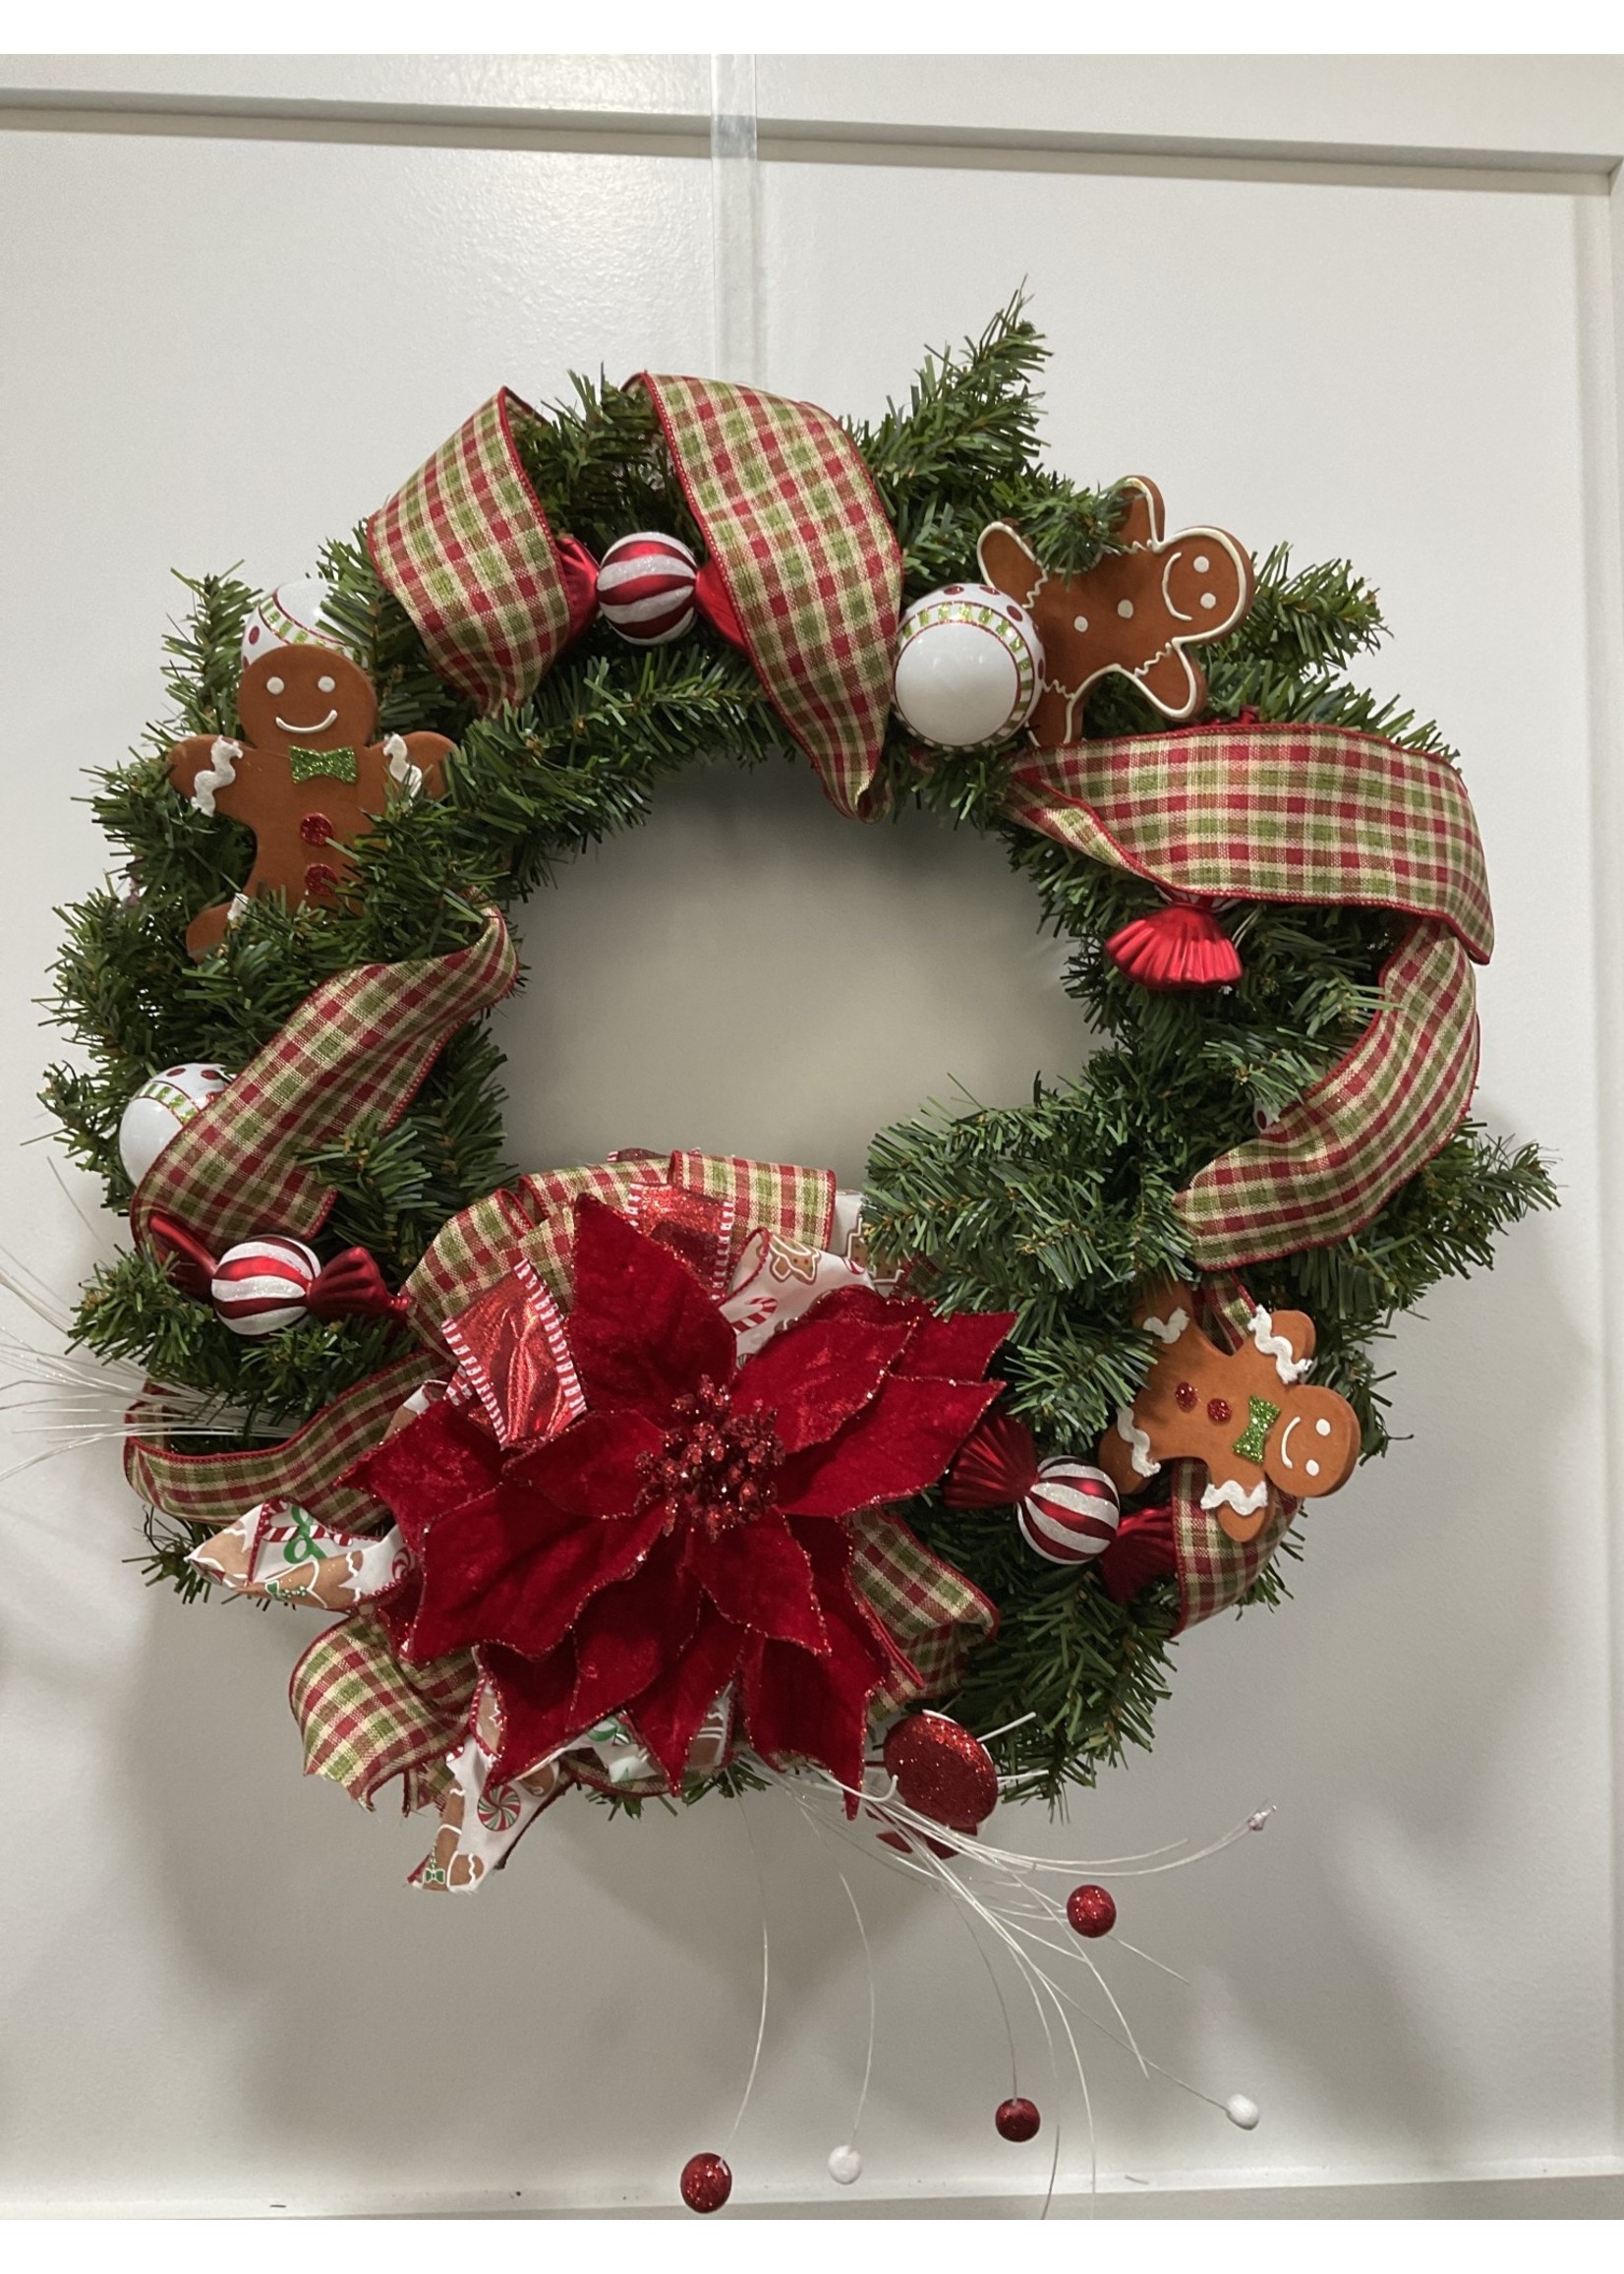 My New Favorite Thing Wreath Evergreen 21 in-Red Poinsettia w/Gingerbread and Red and Green Check Ribbon